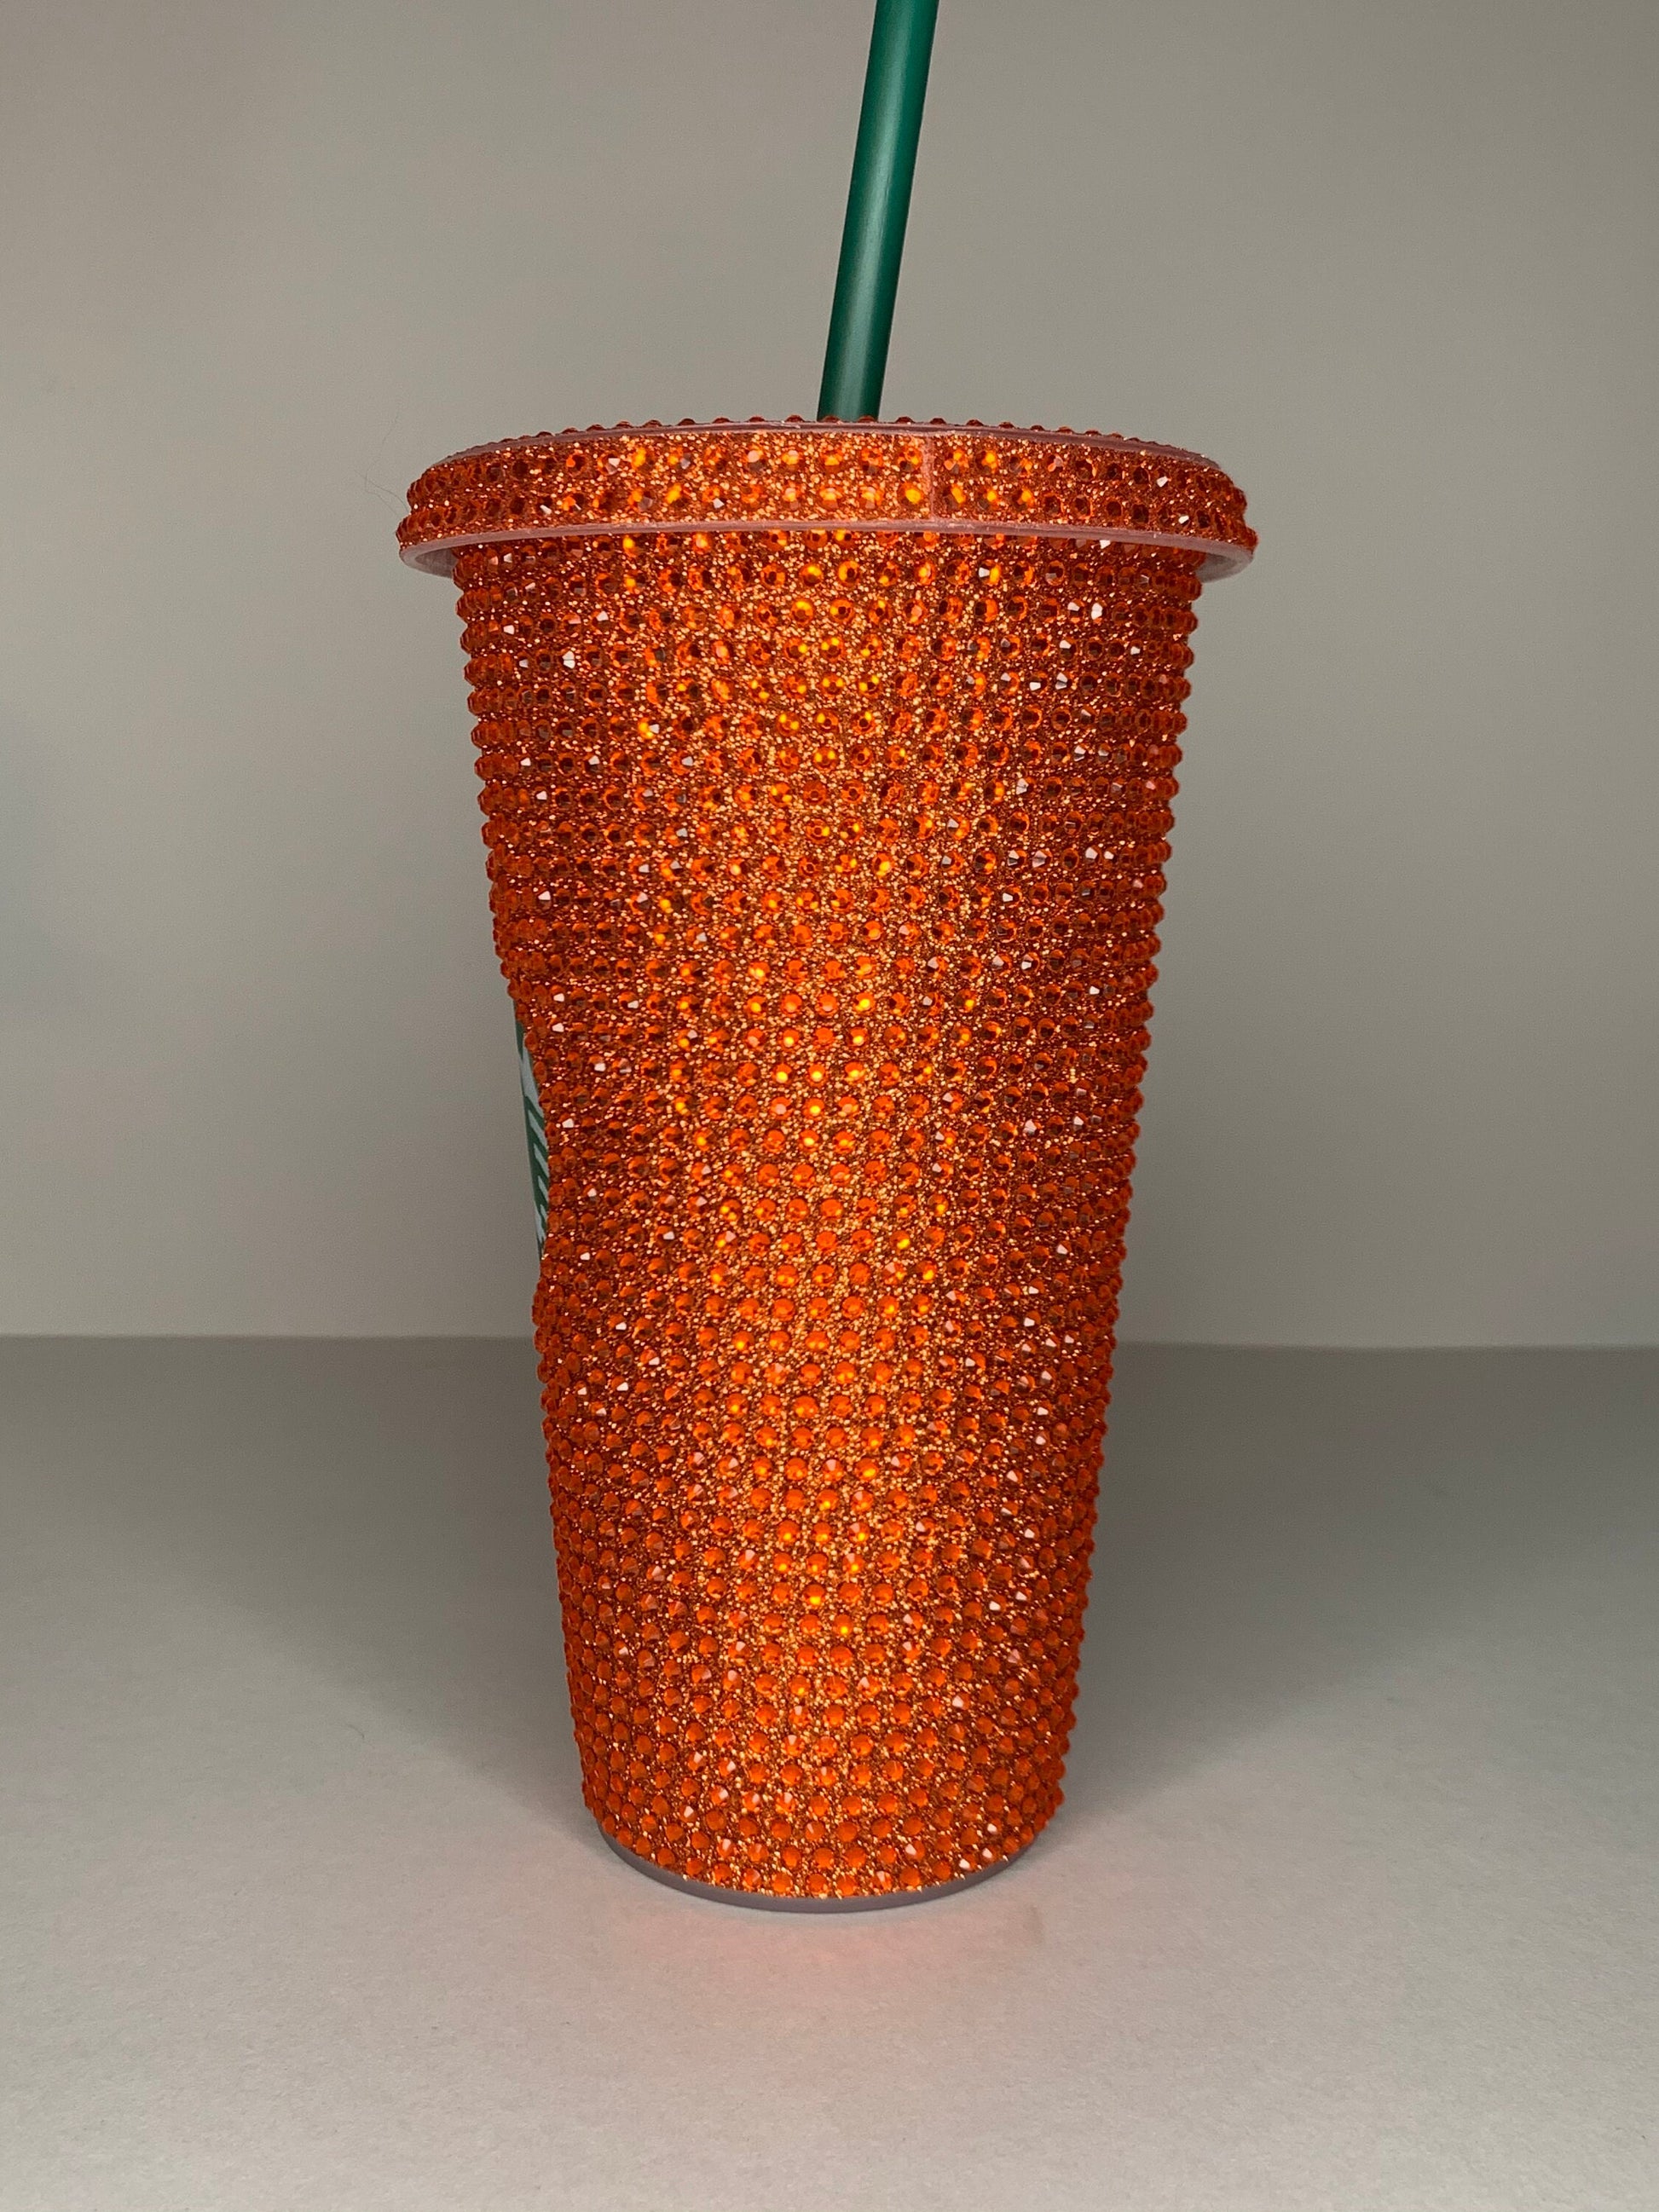 3 Starbucks Reusable Cold Cups with Lids and Straws